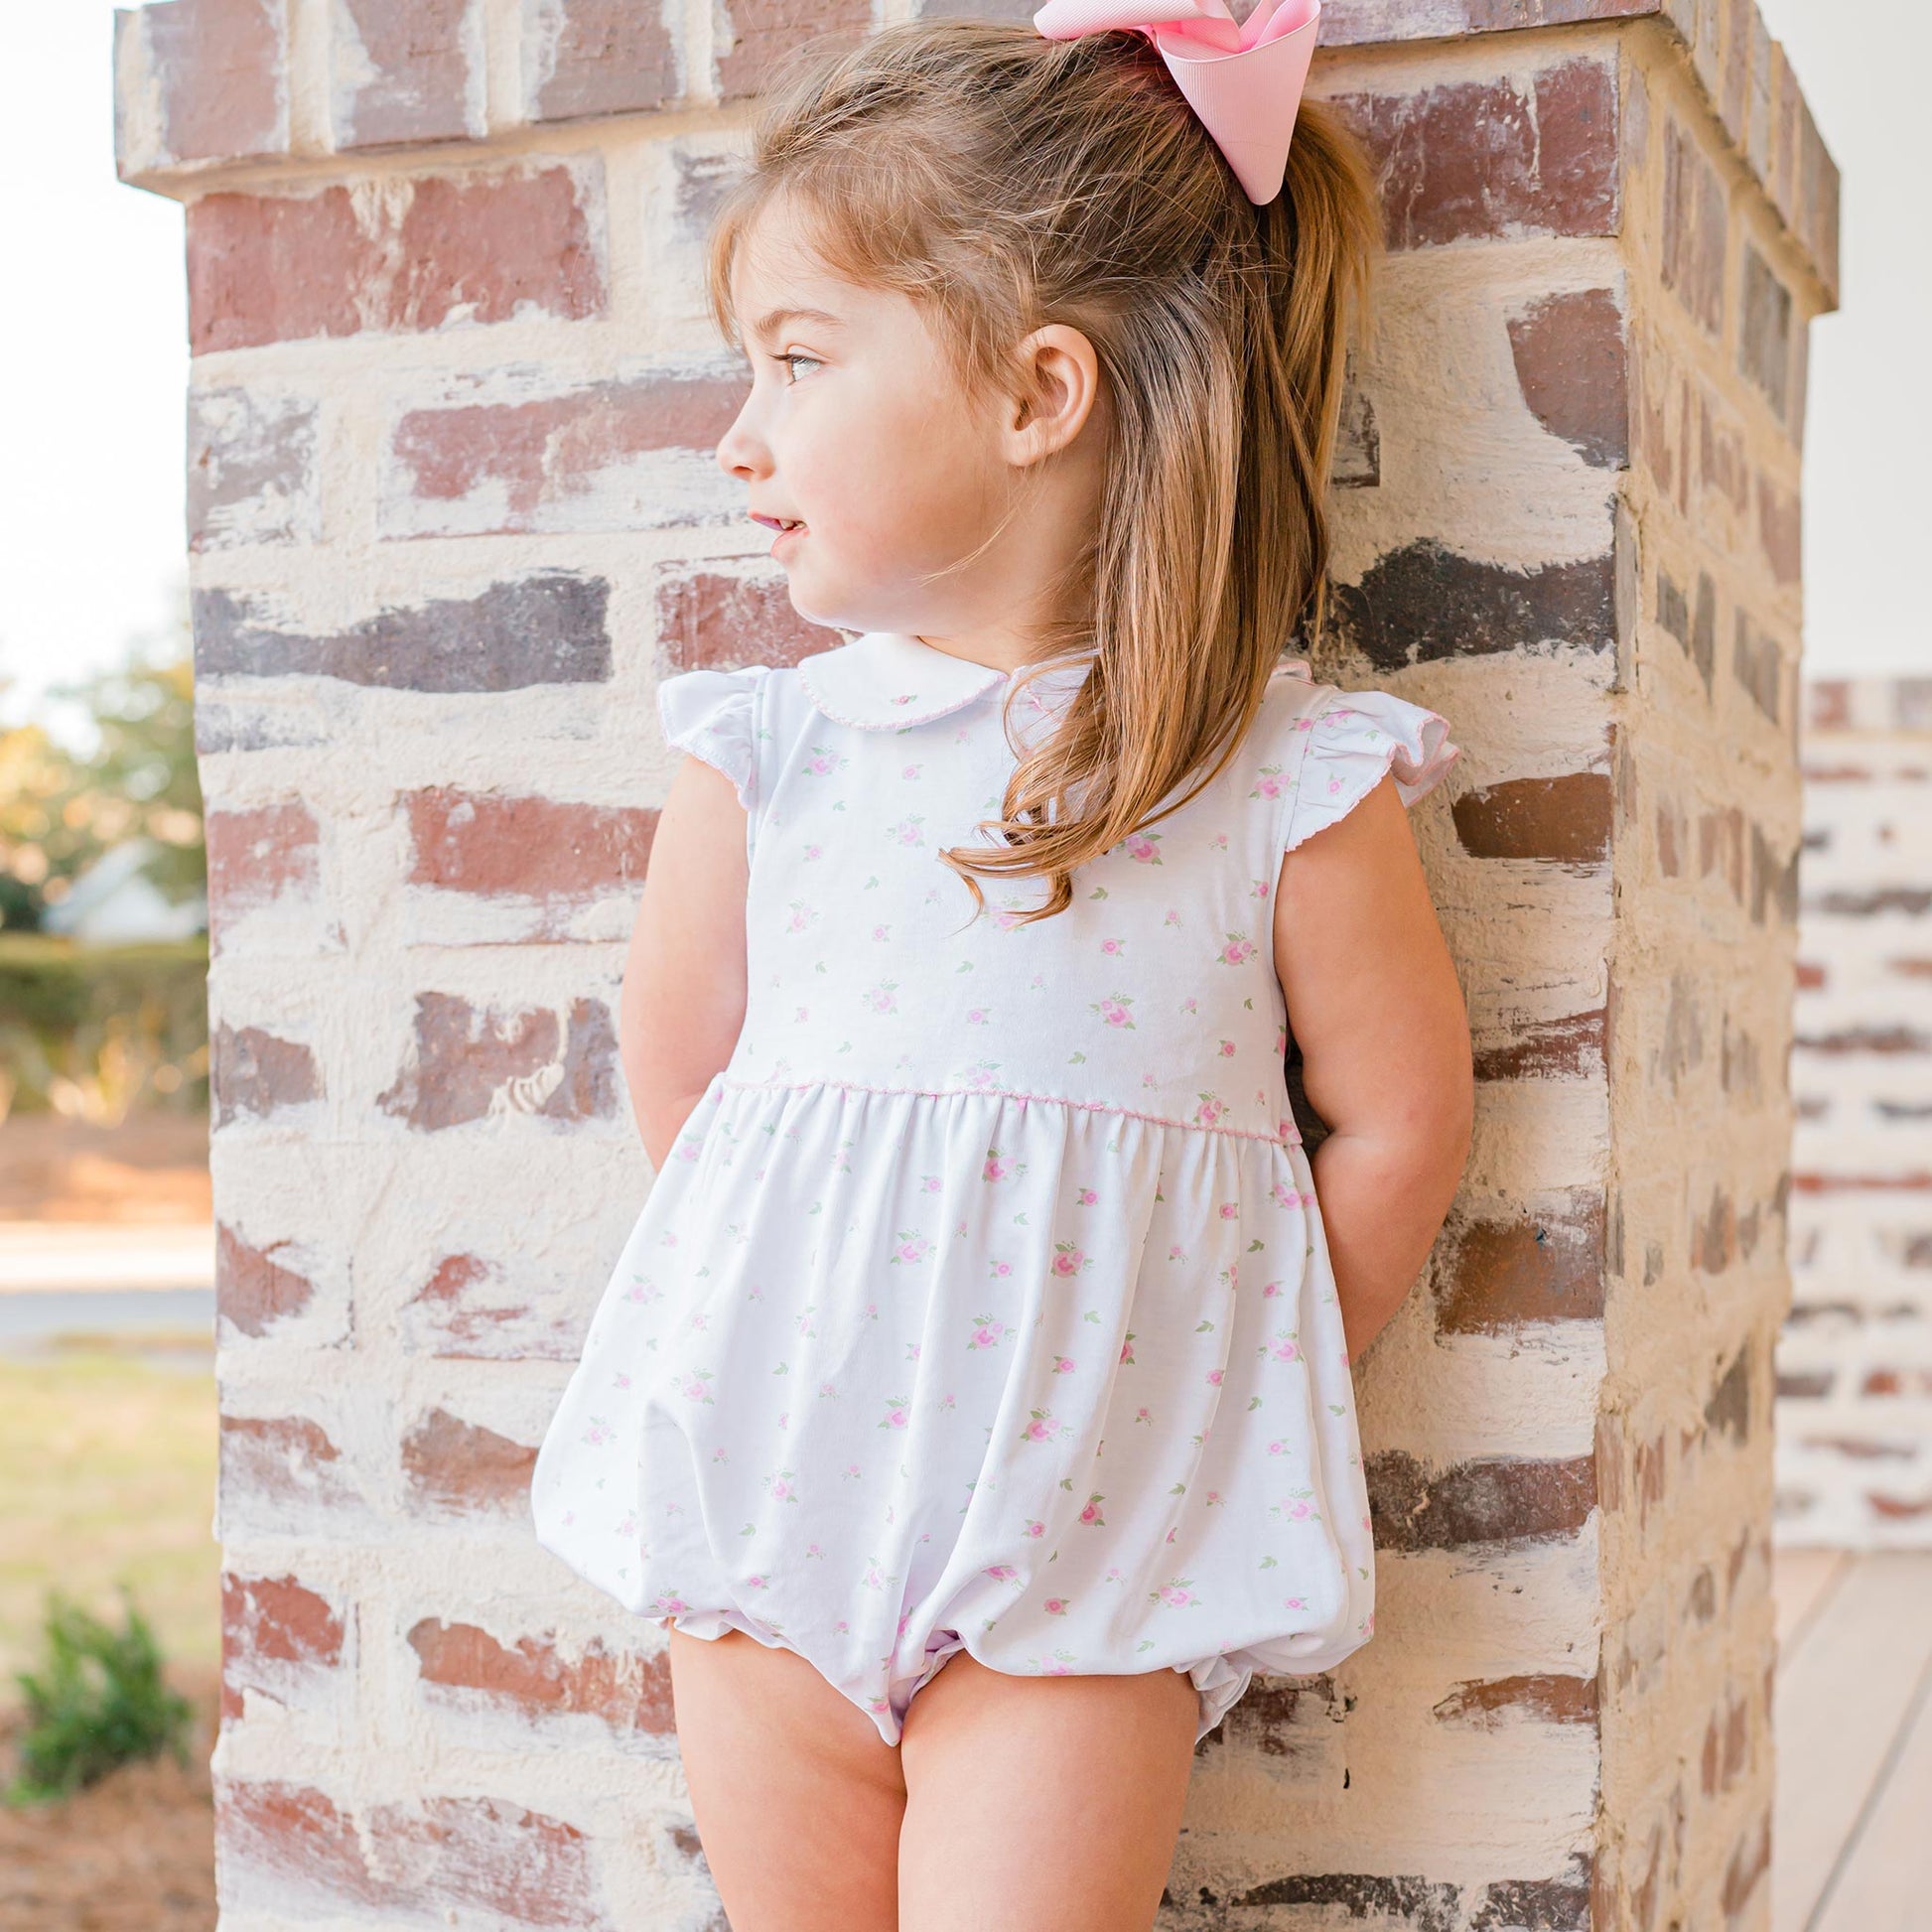 little girl leaning against a pole wearing Girls Rosette Pima Bubble with a pink bow in her hair